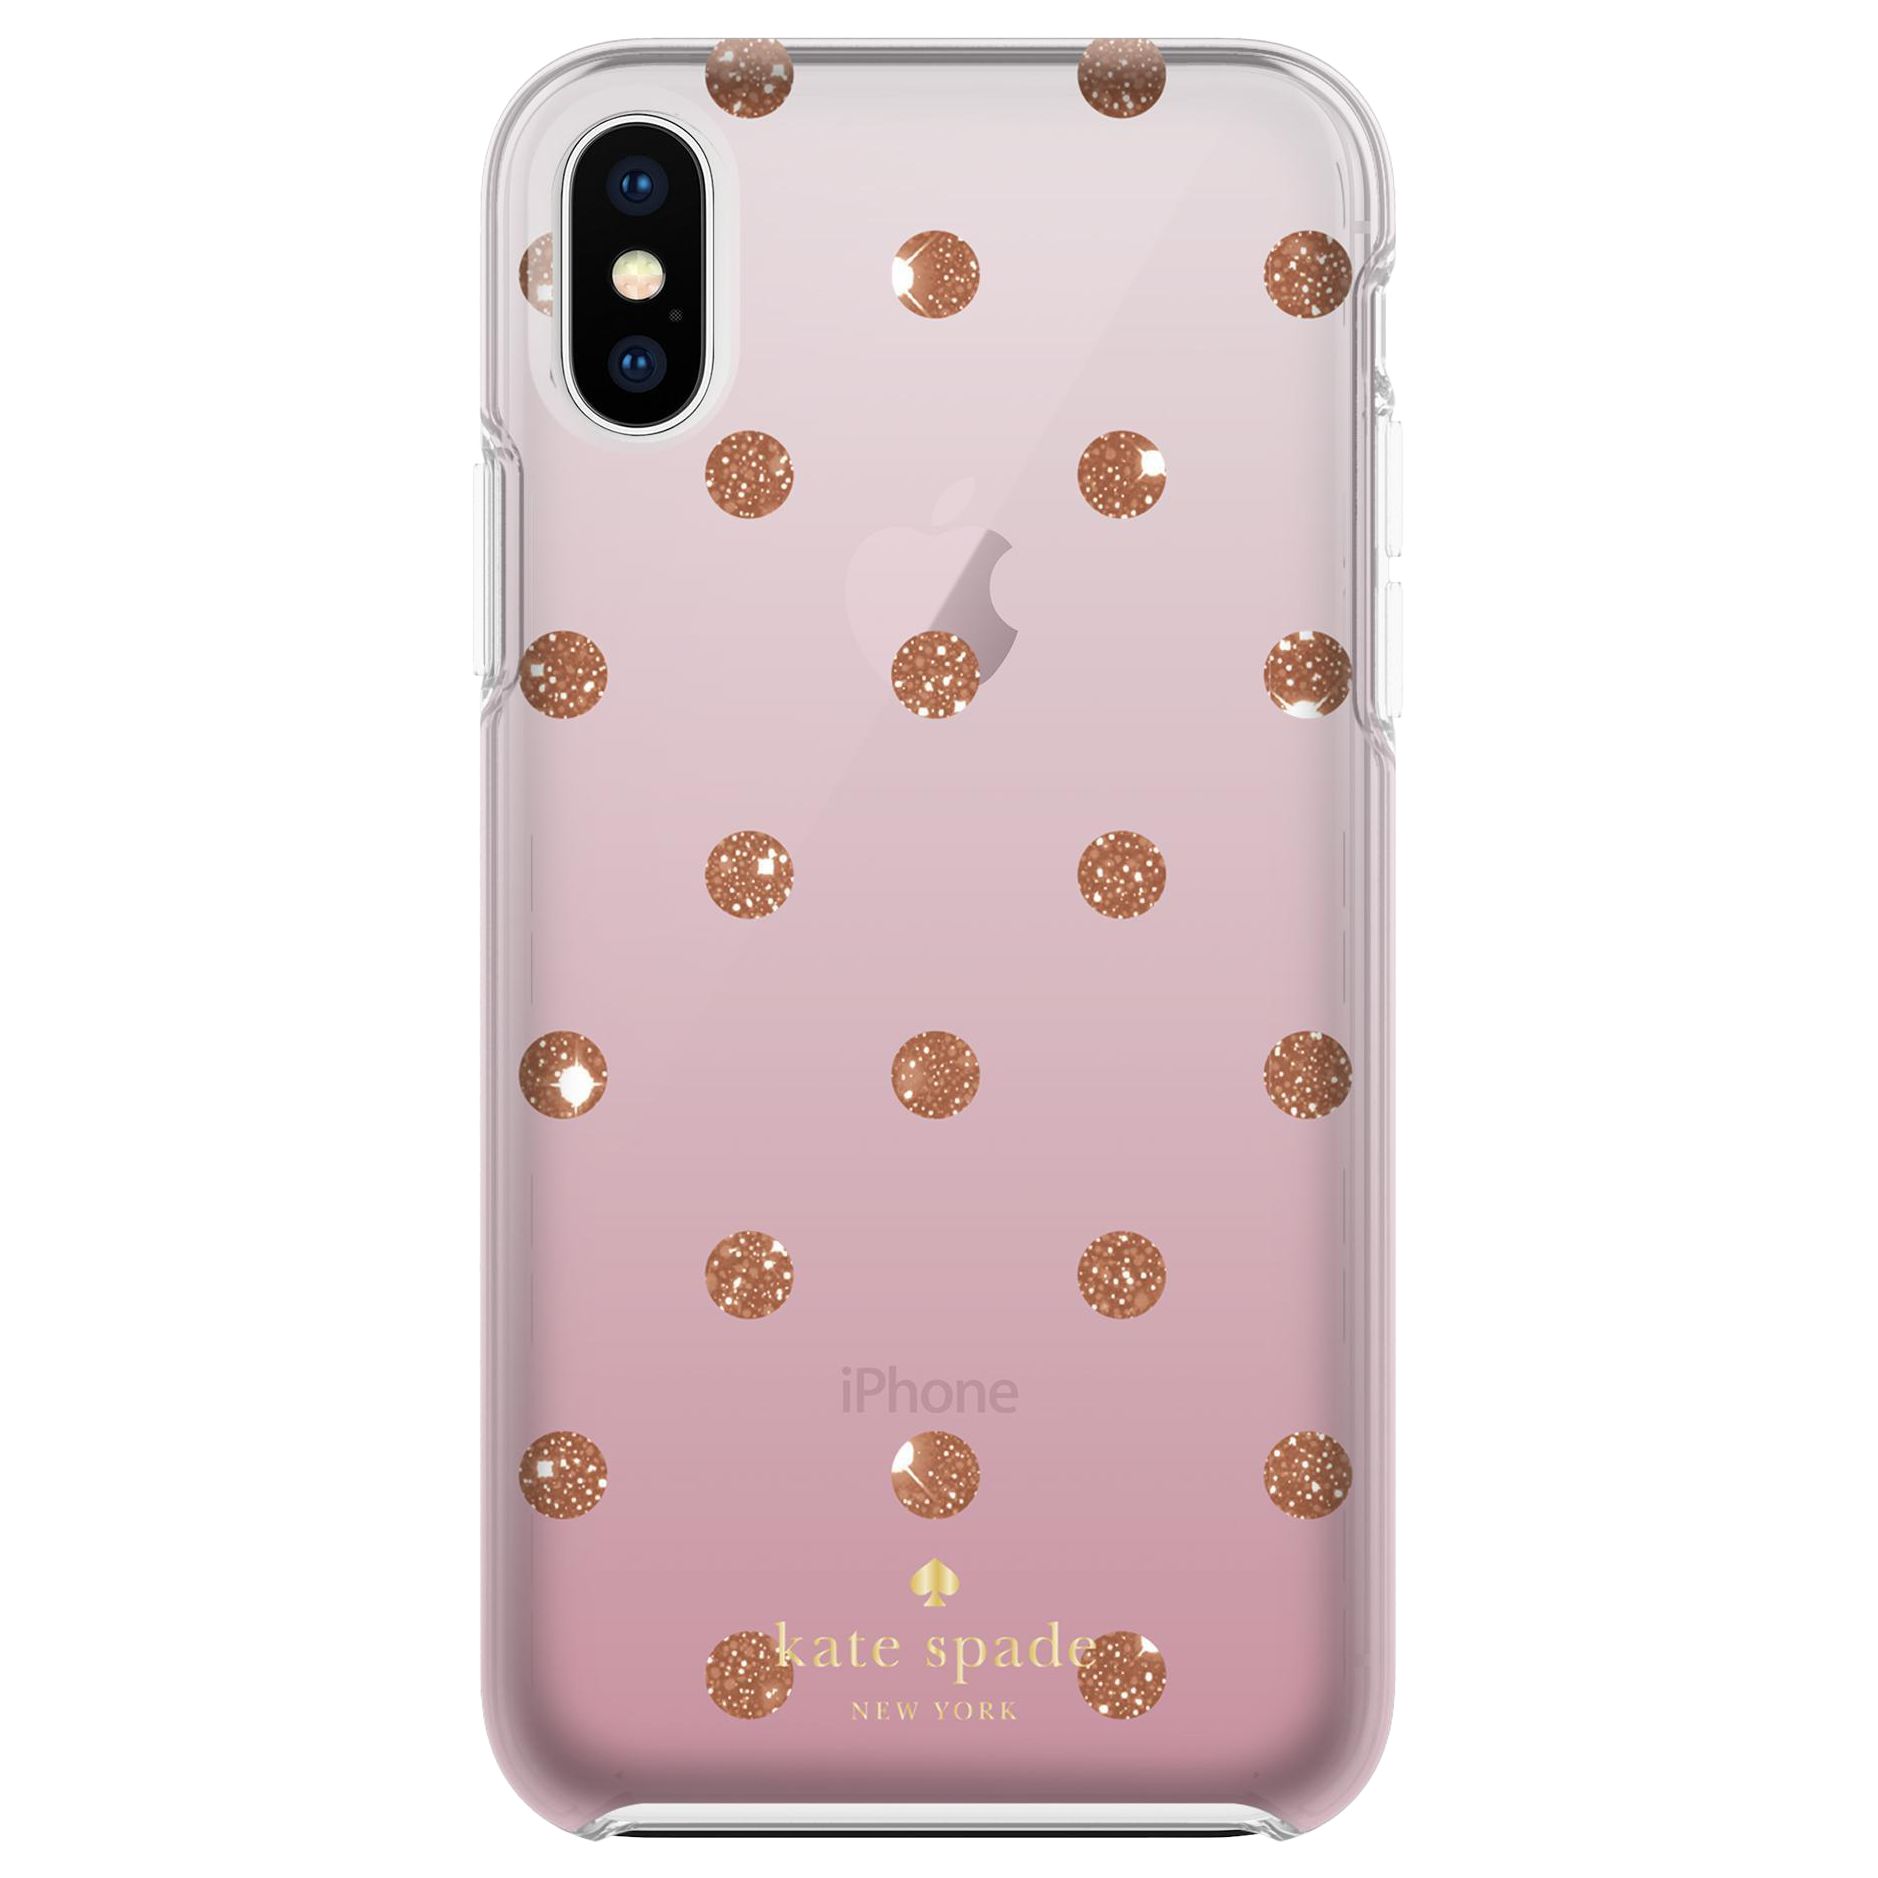 kate spade new york Ombre Dot Hard Case for iPhone X, Clear/Glitter Pink